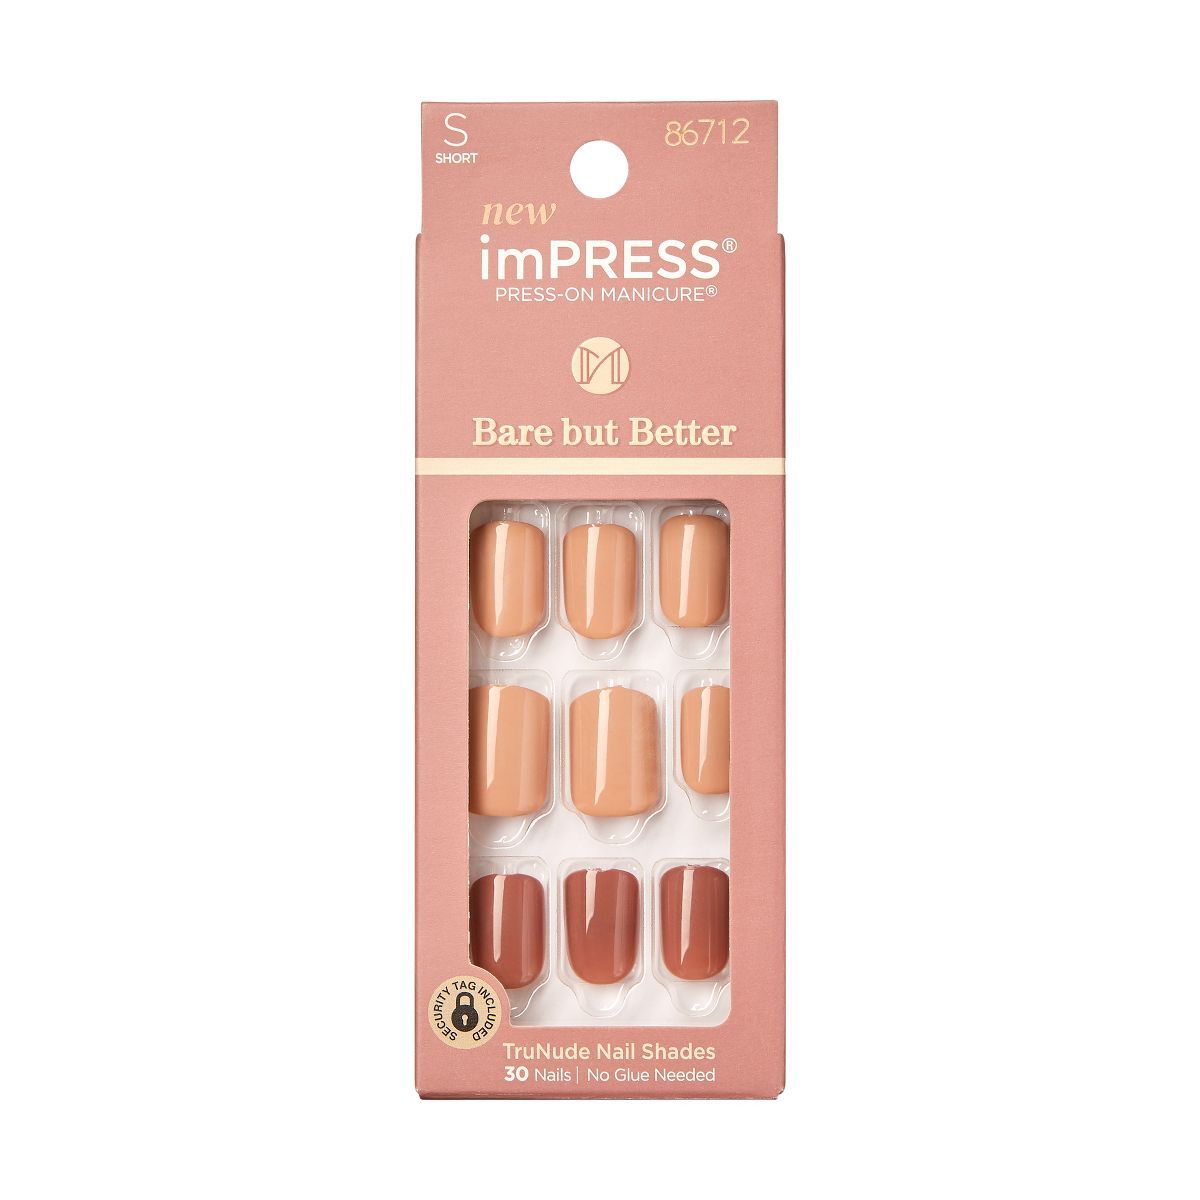 KISS imPRESS Bare But Better Press-On Fake Nails - Sweet Earth - 30ct | Target